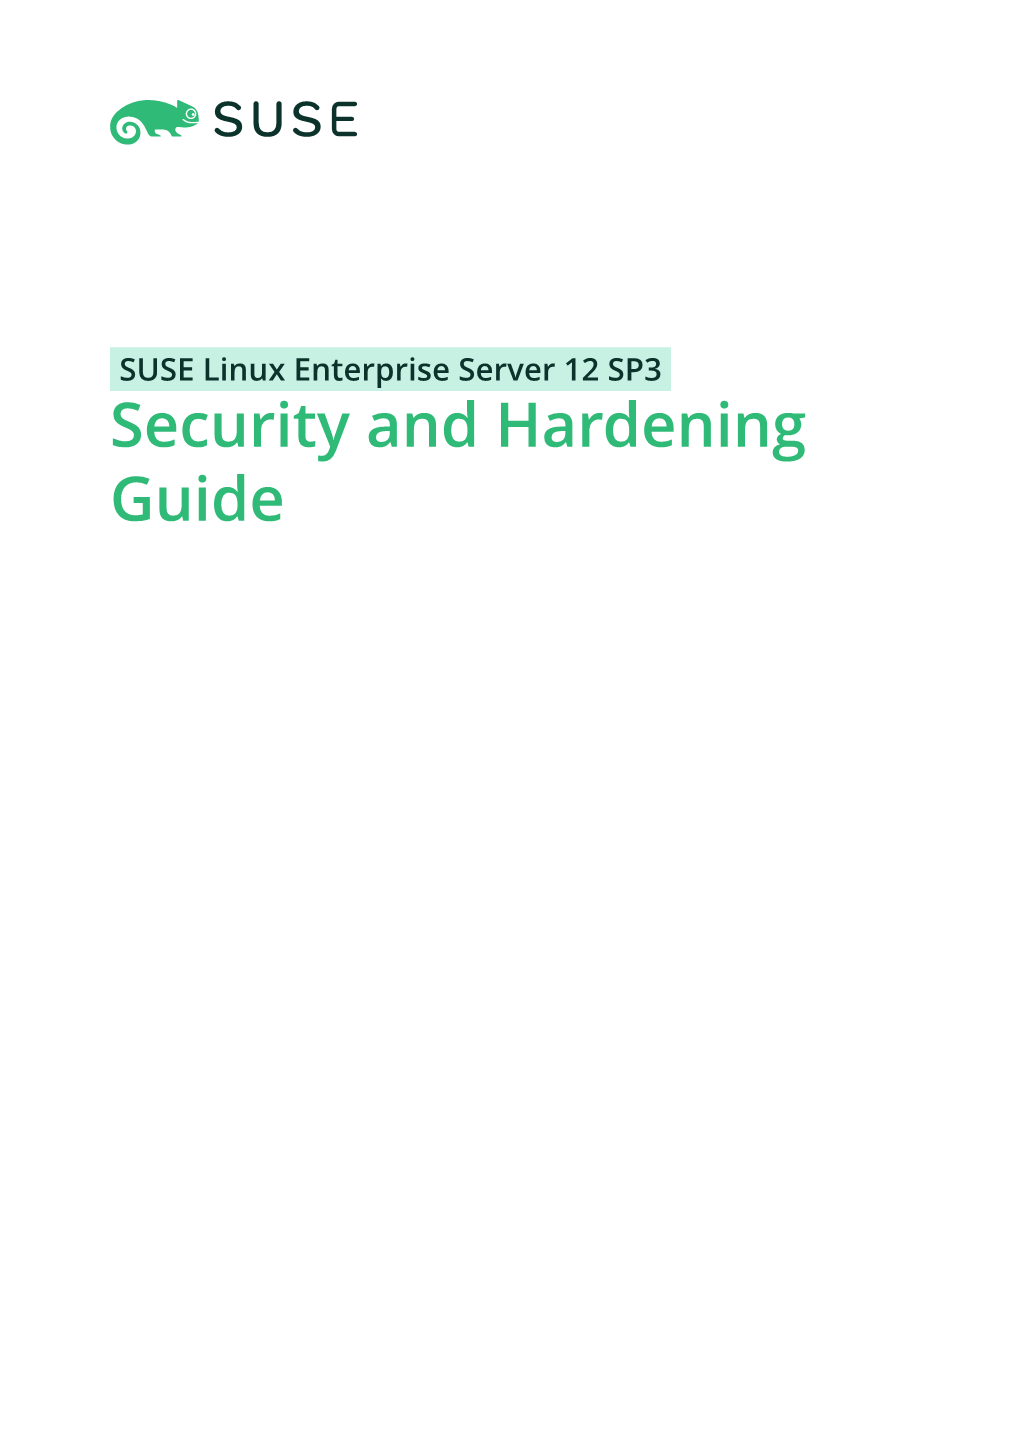 Security and Hardening Guide Security and Hardening Guide SUSE Linux Enterprise Server 12 SP3